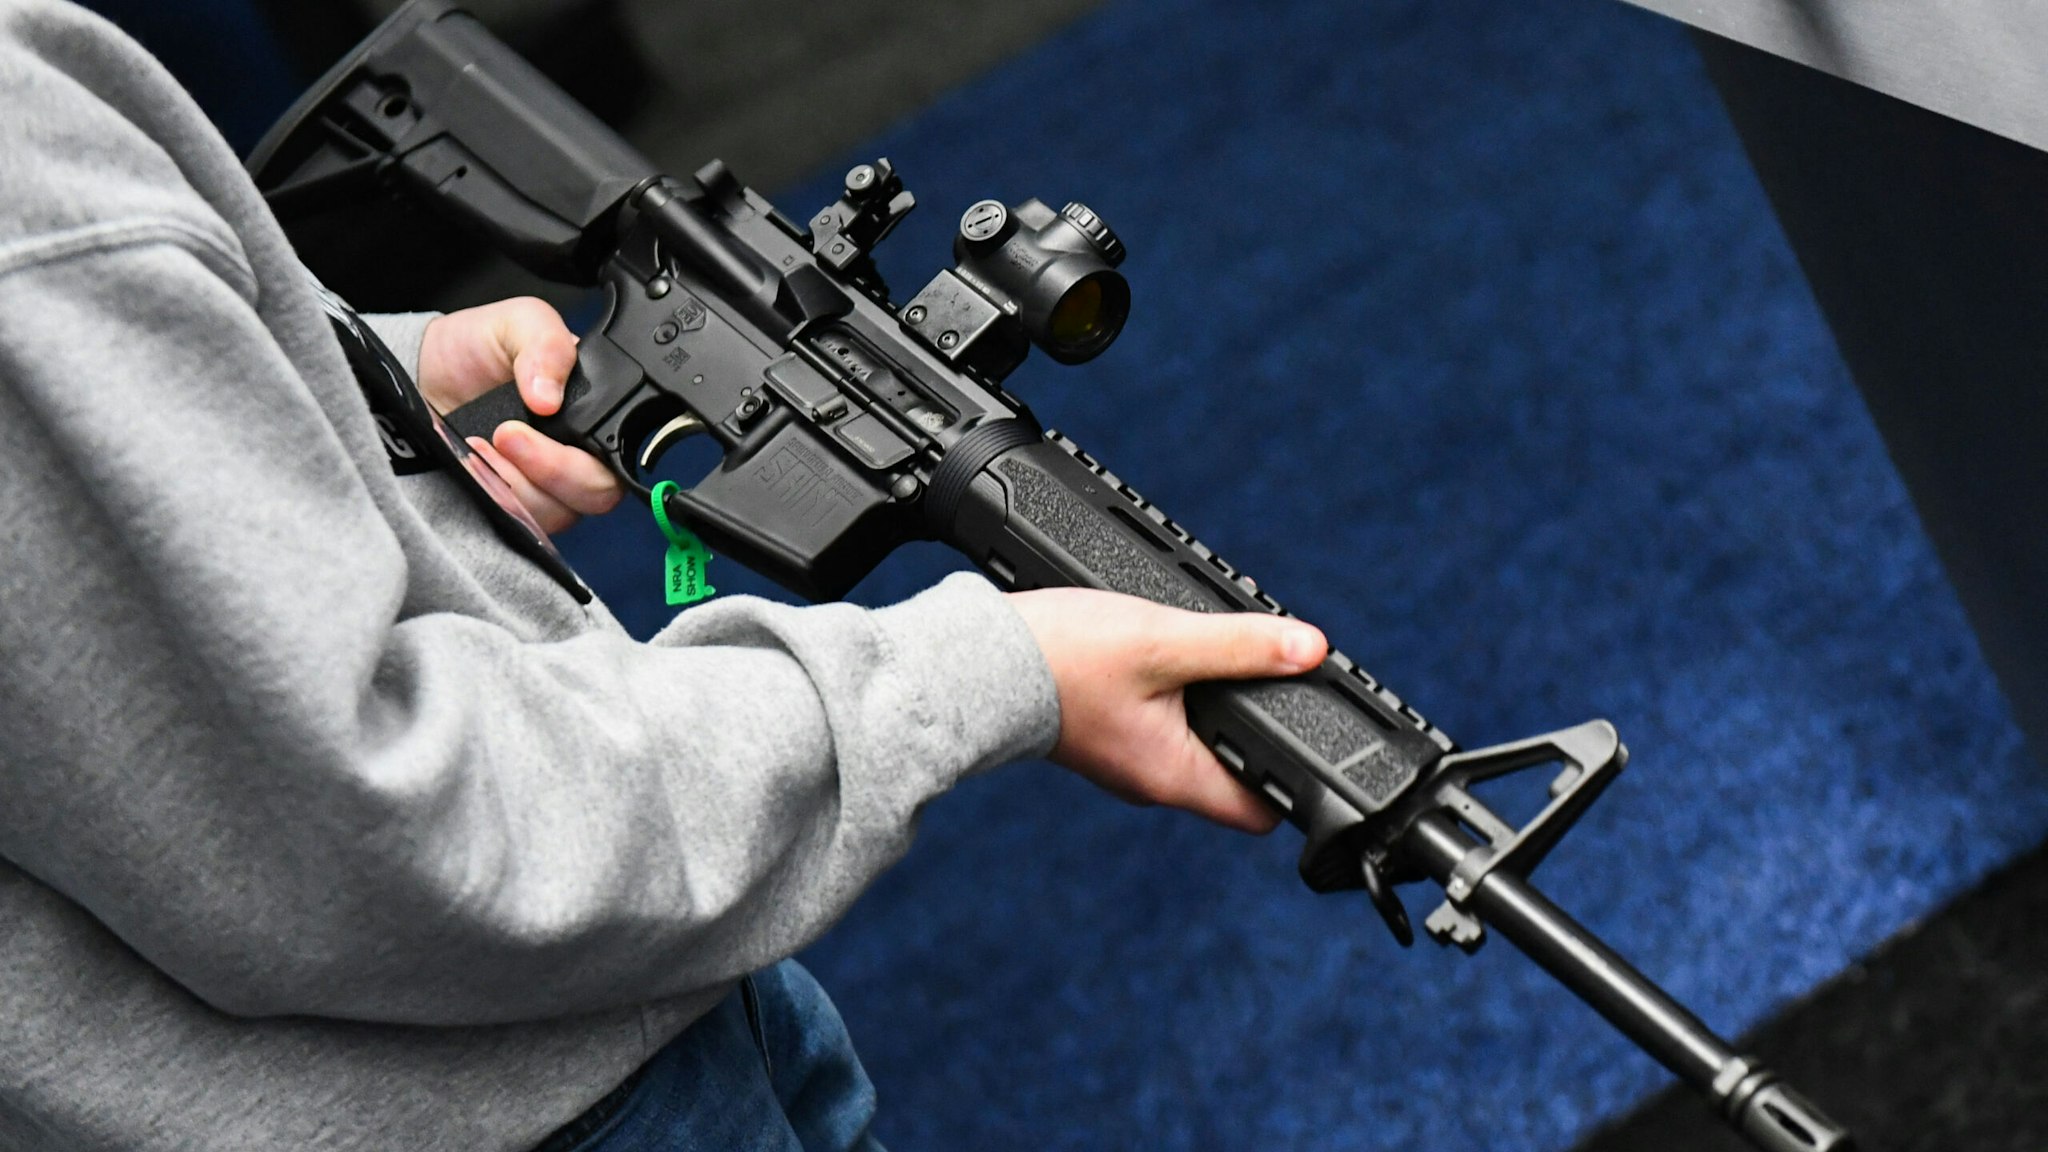 An attendee holds a Springfield Armory SAINT AR-15 style rifle displayed during the National Rifle Association (NRA) Annual Meeting at the George R. Brown Convention Center, in Houston, Texas on May 28, 2022. - America's powerful National Rifle Association kicked off a major convention in Houston Friday, days after the horrific massacre of children at a Texas elementary school, but a string of high-profile no-shows underscored deep unease at the timing of the gun lobby event.